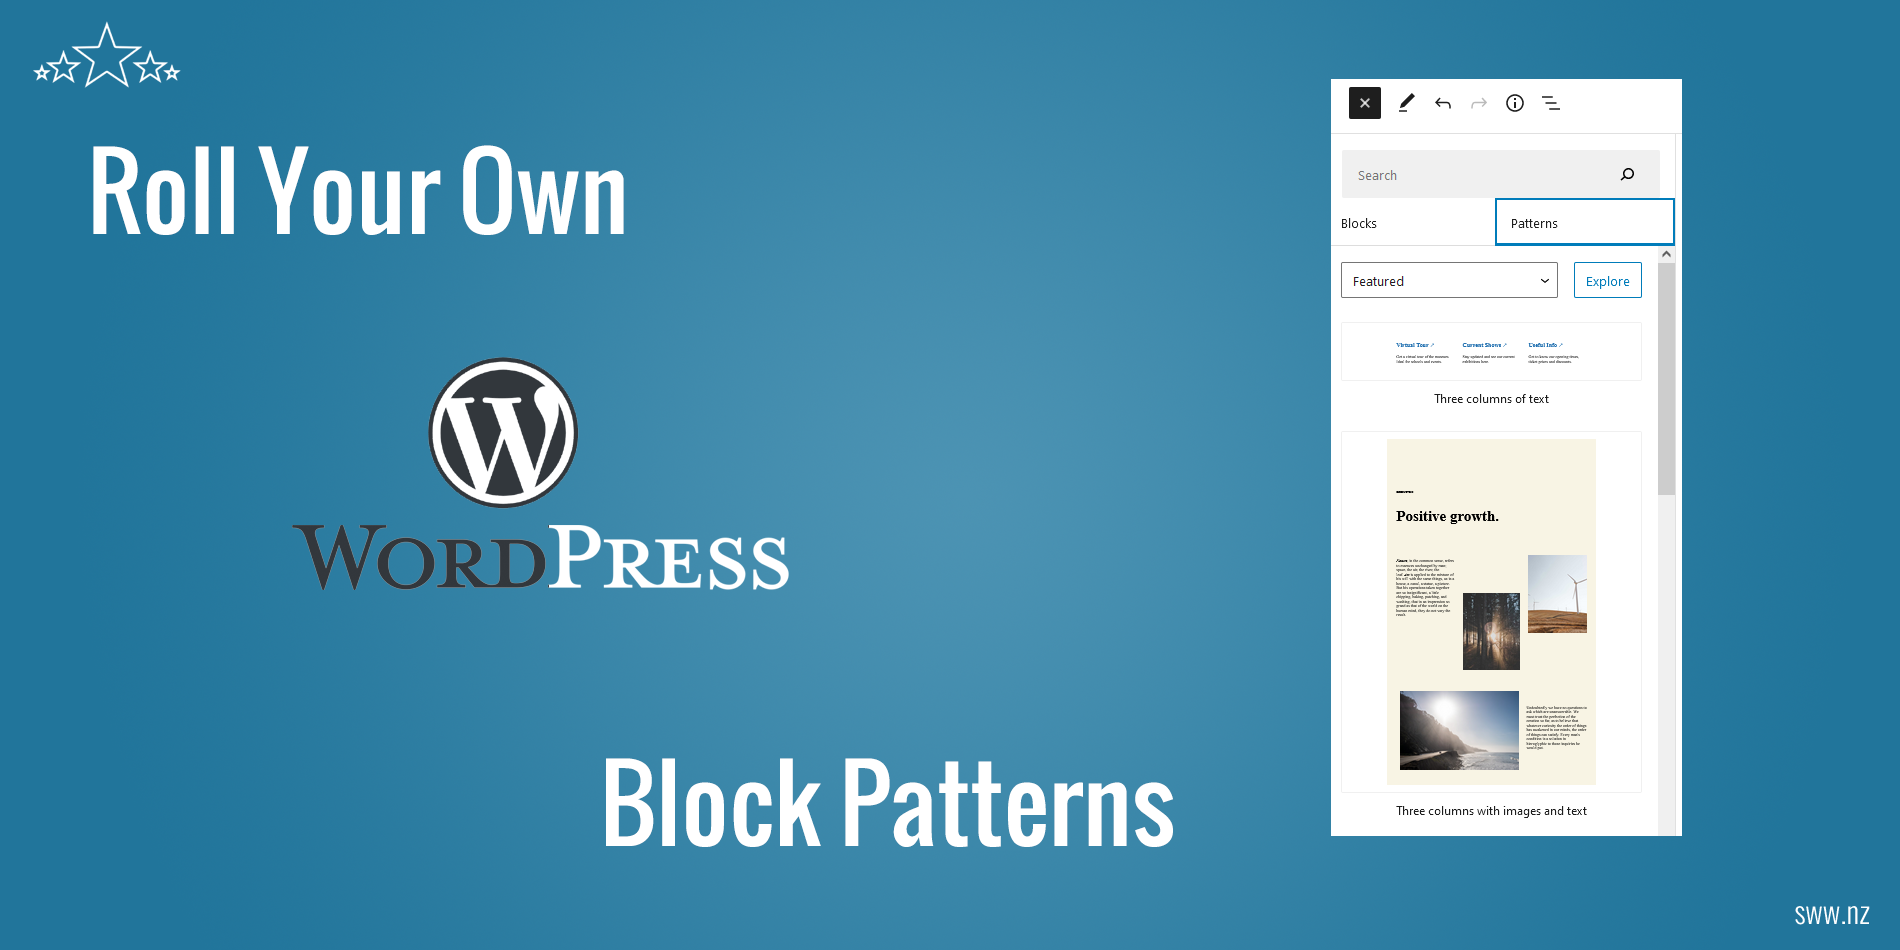 How to create WordPress Block Patterns and Block Templates